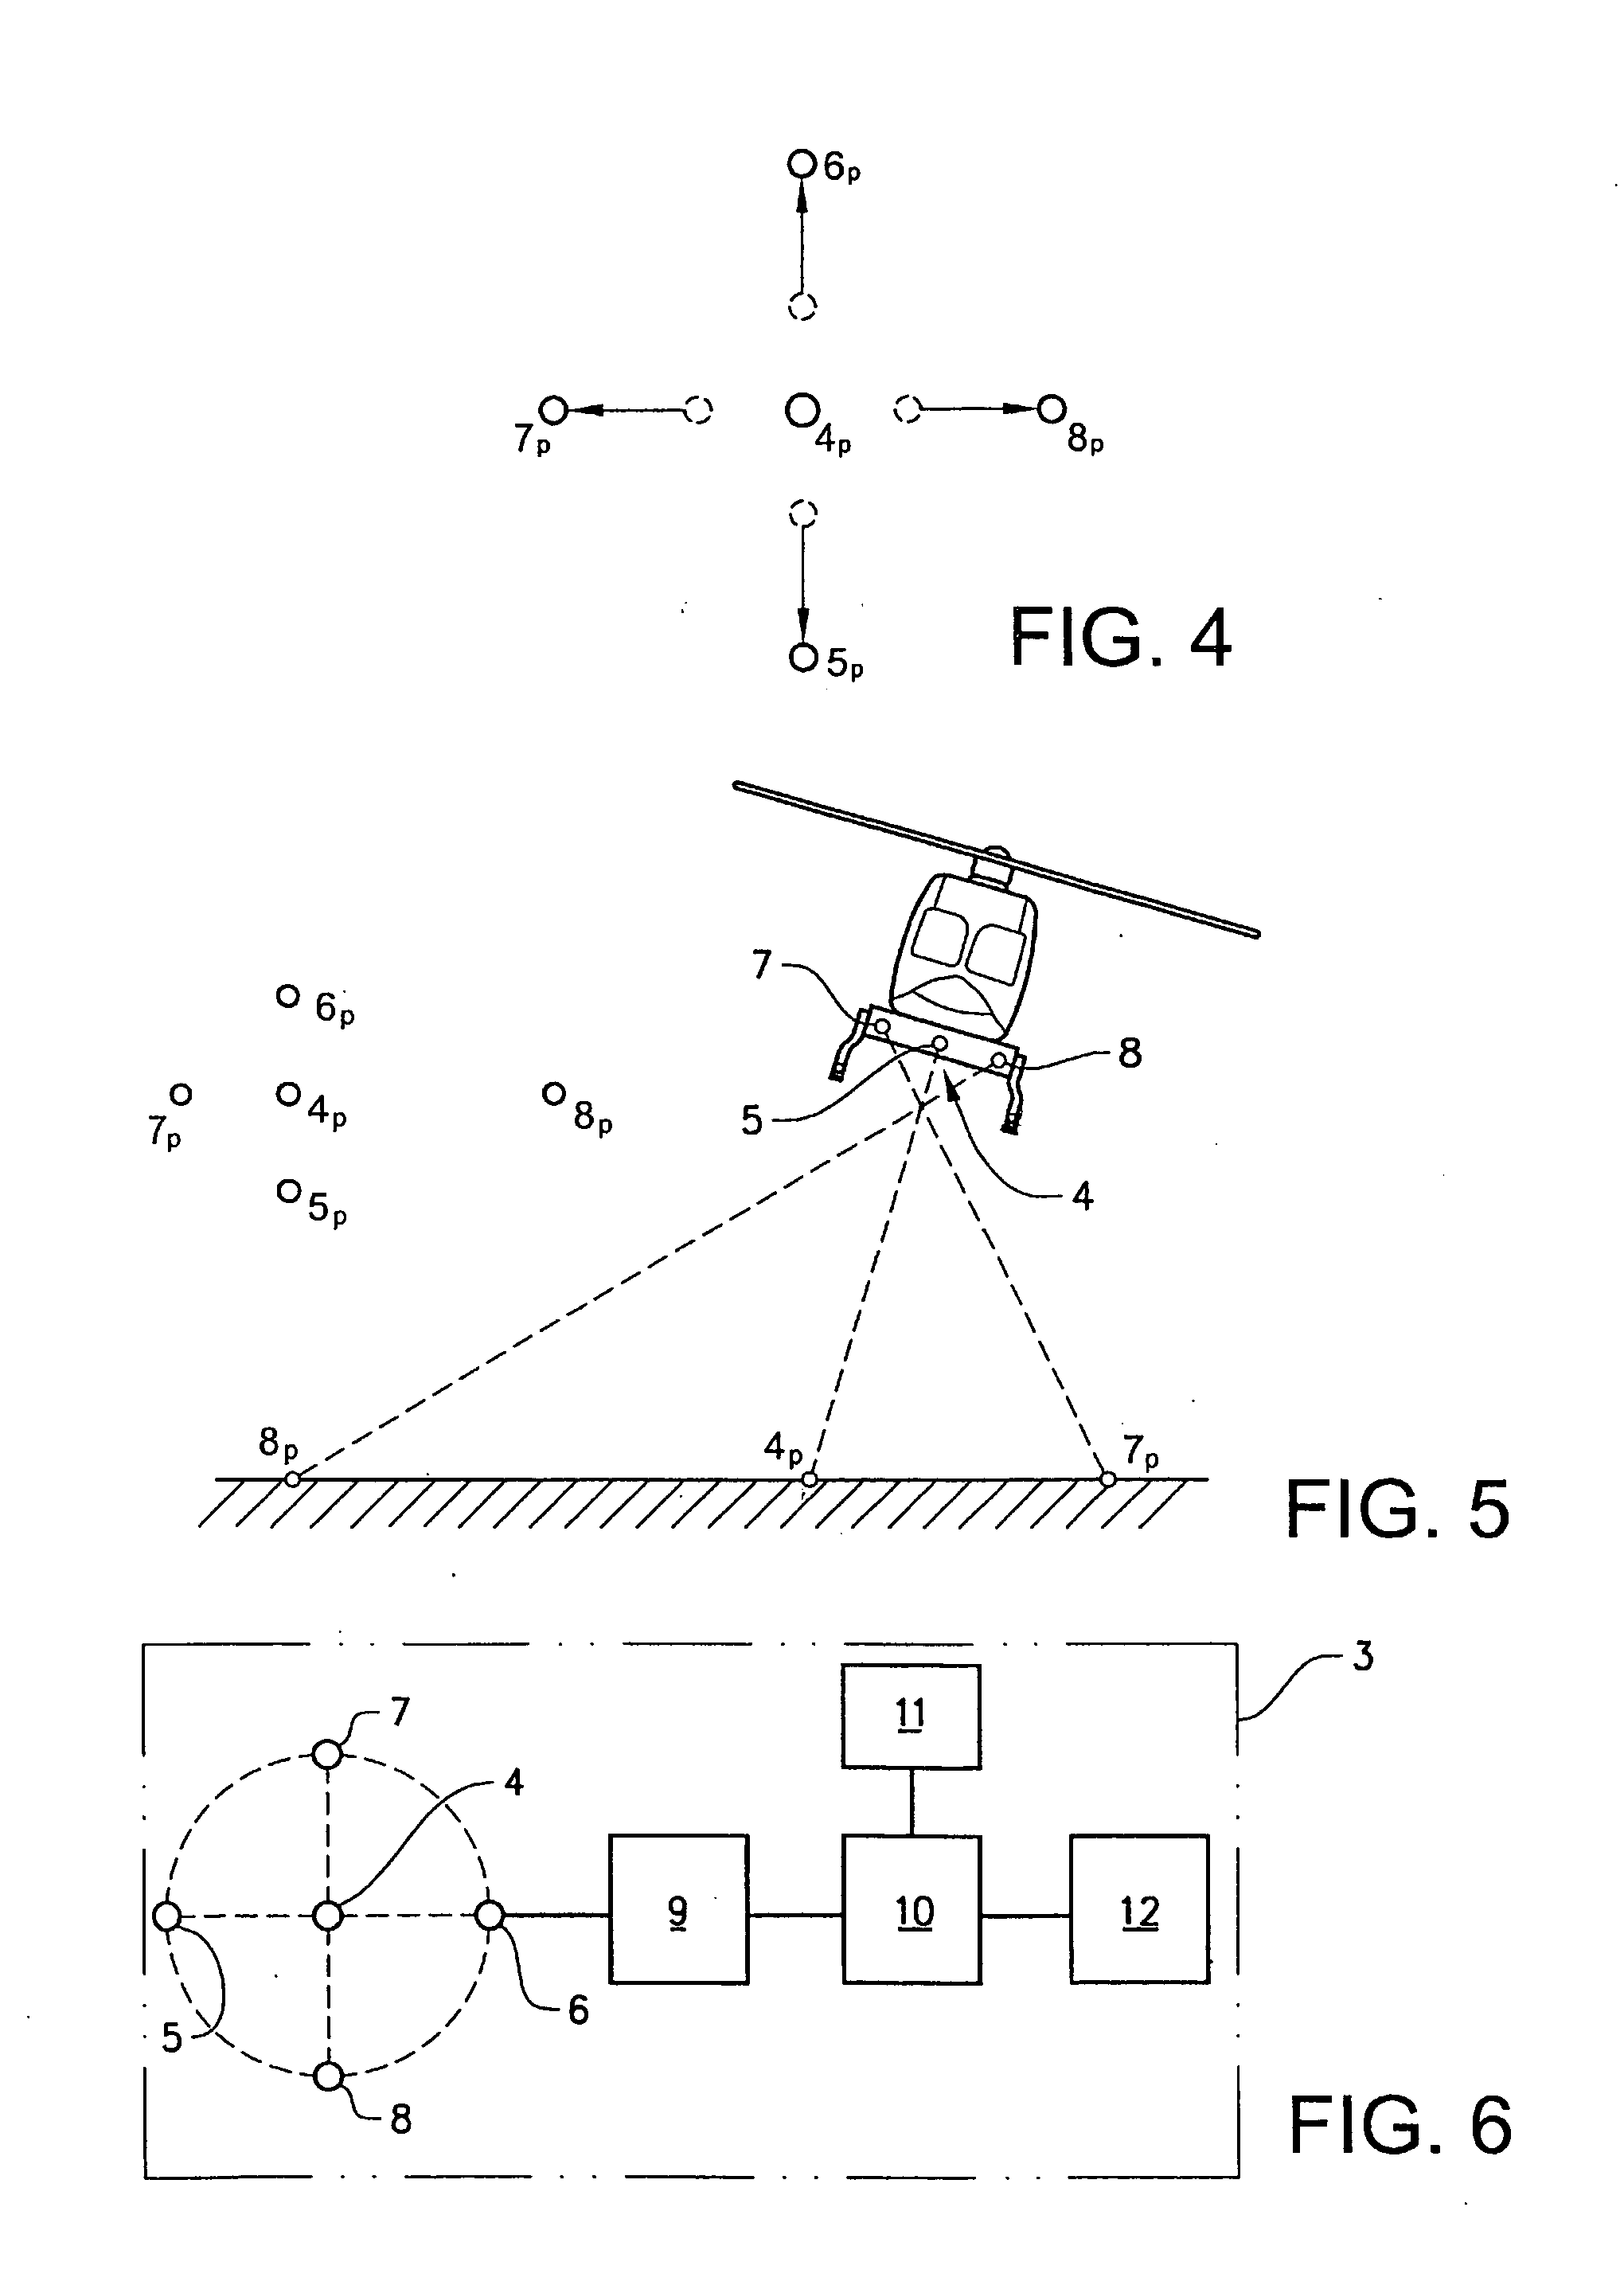 Method and system for facilitating autonomous landing of aerial vehicles on a surface